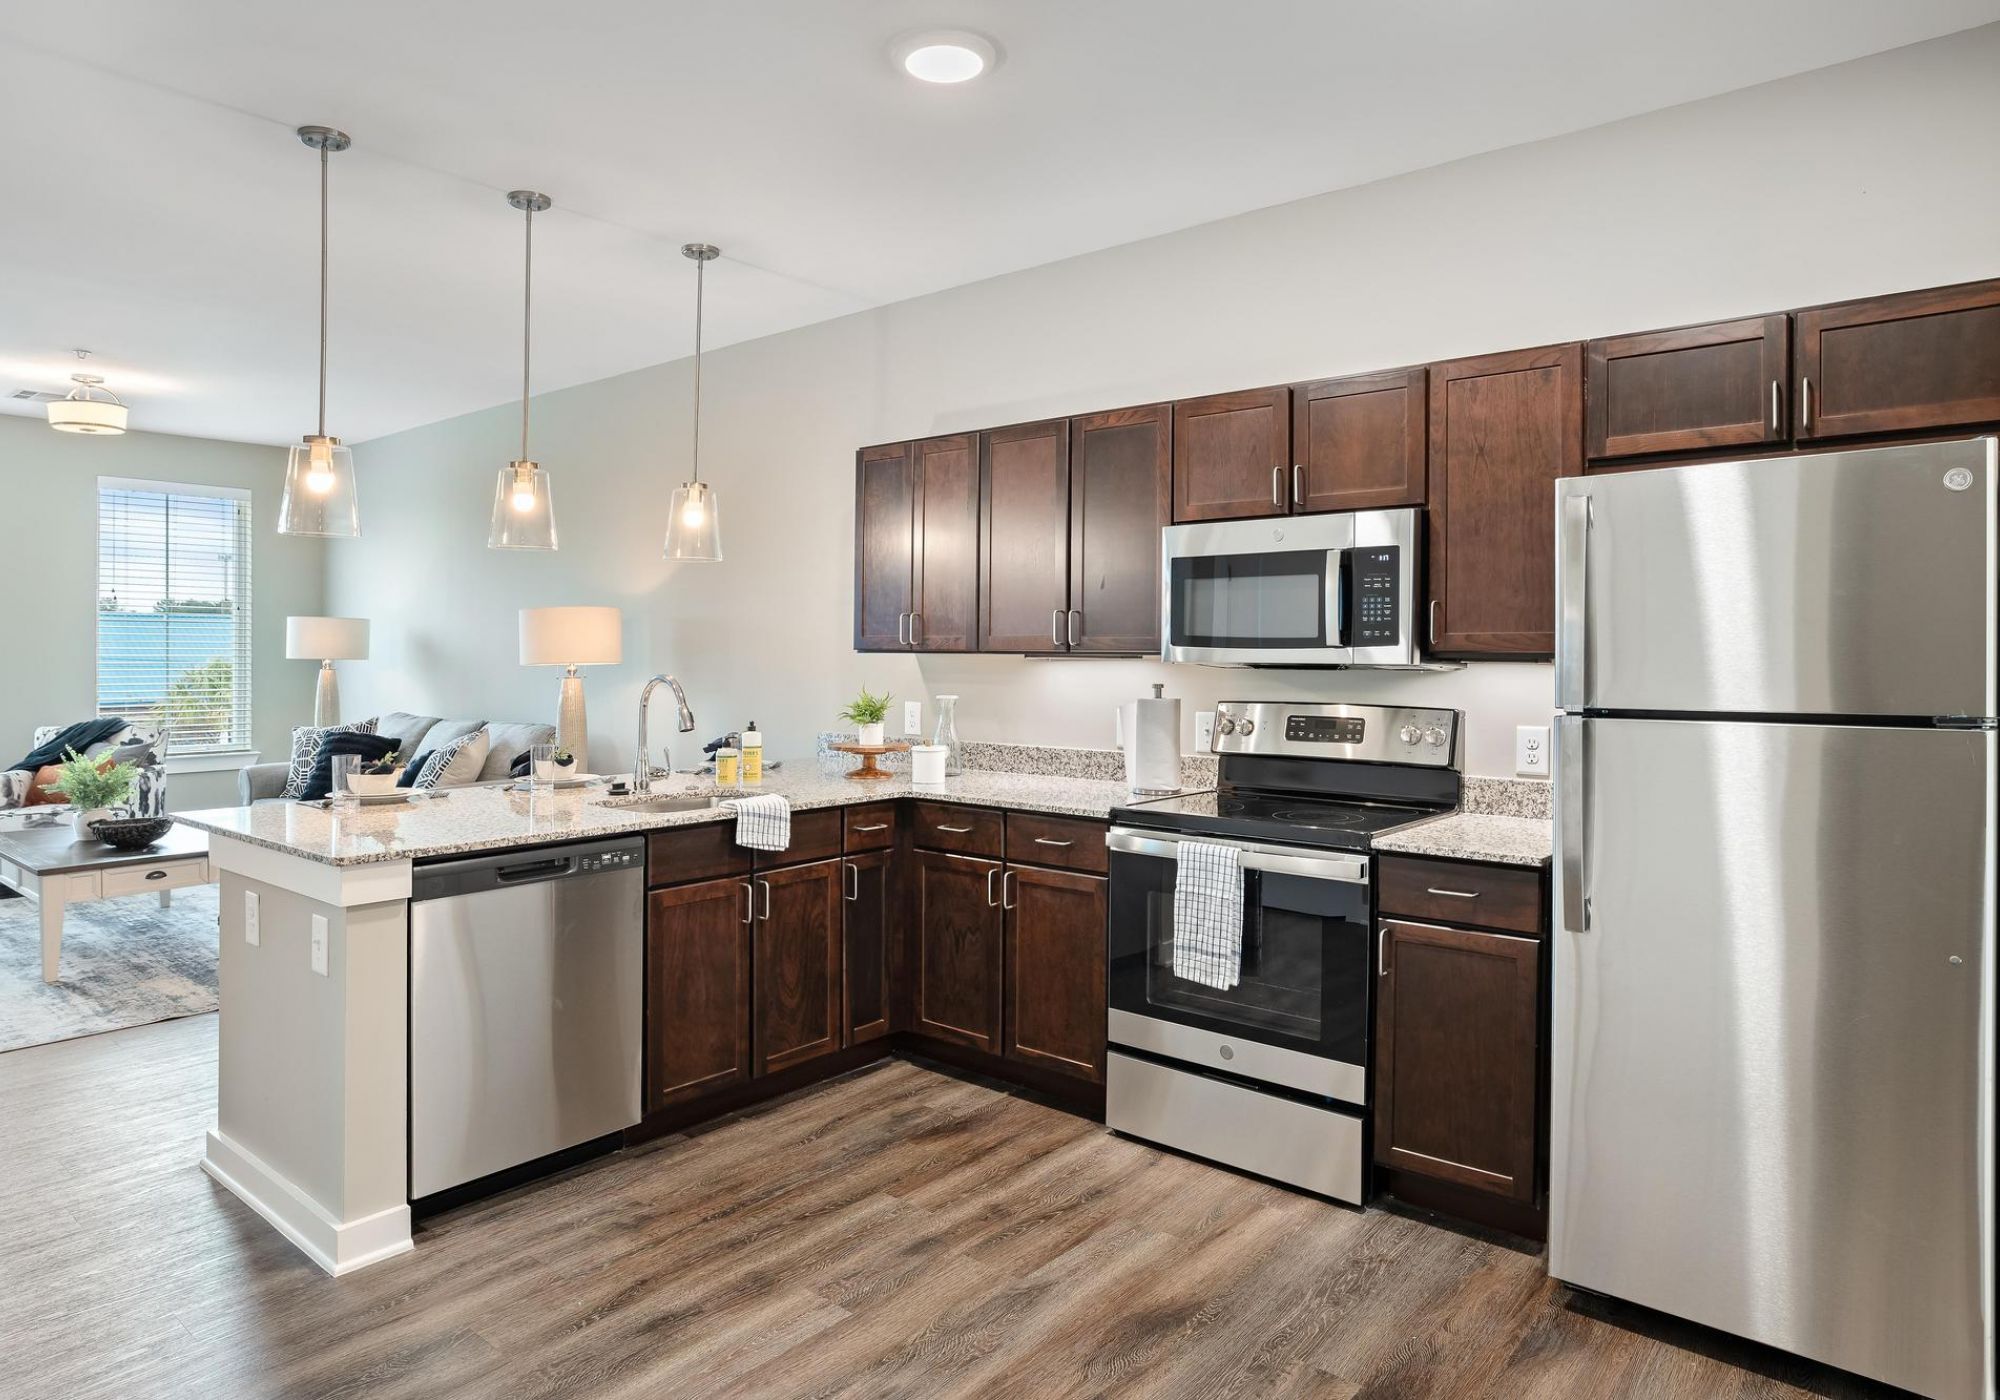 The Claiborne at Brickyard Crossing senior living community full kitchen with high-end finishes